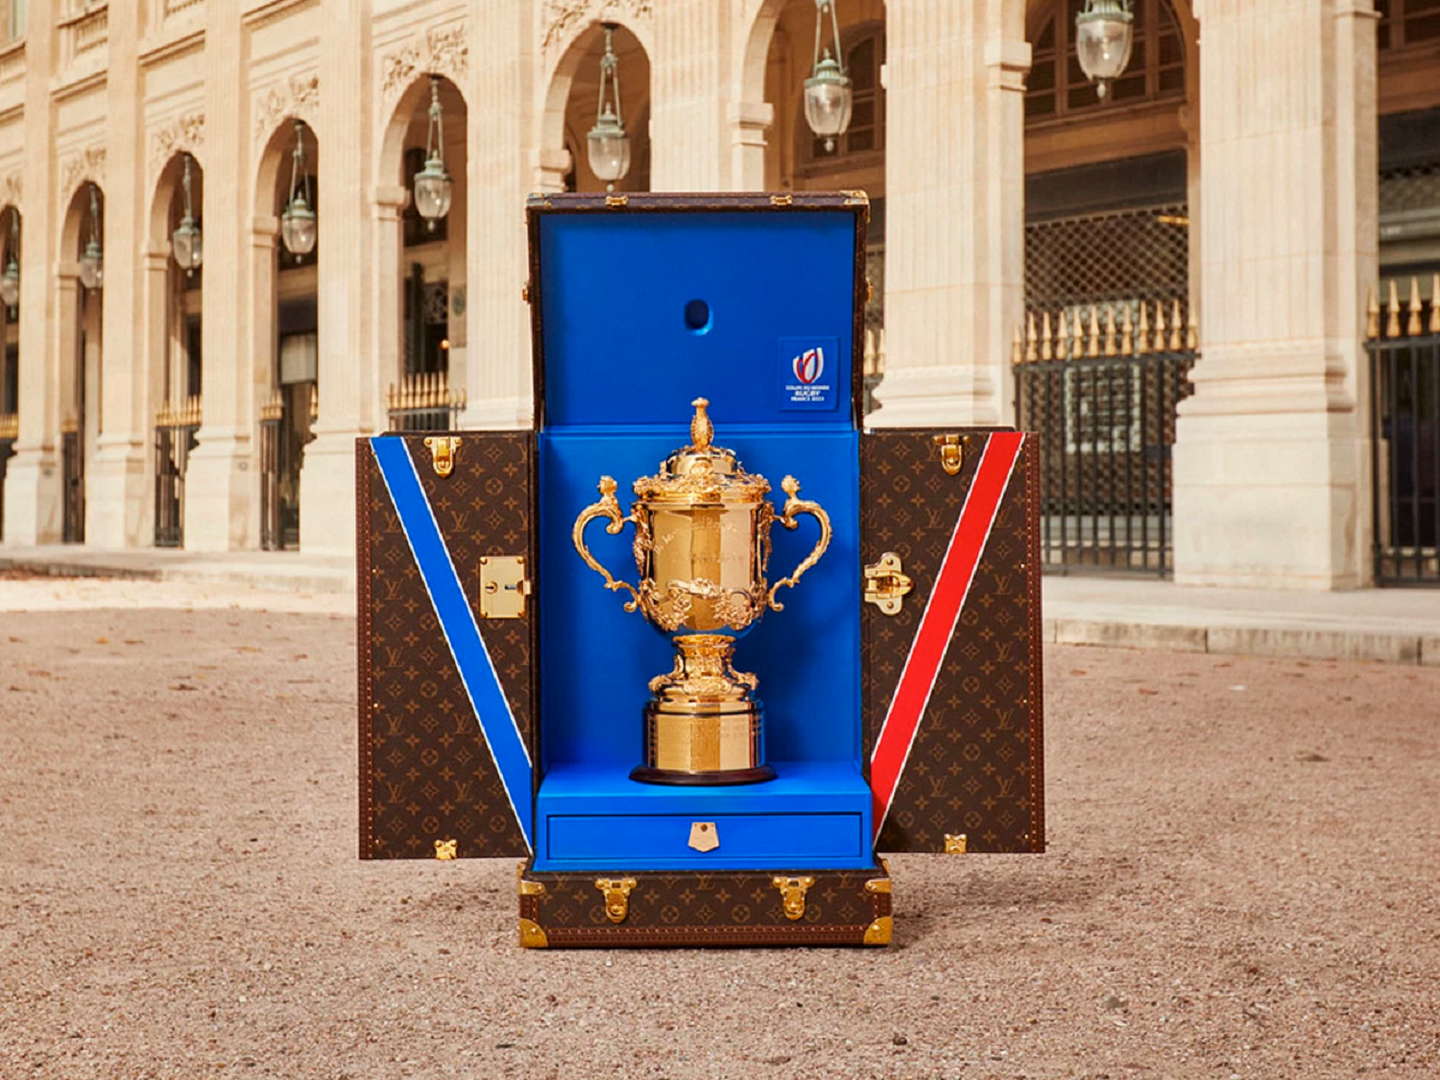 Louis Vuitton Wins The World Cup